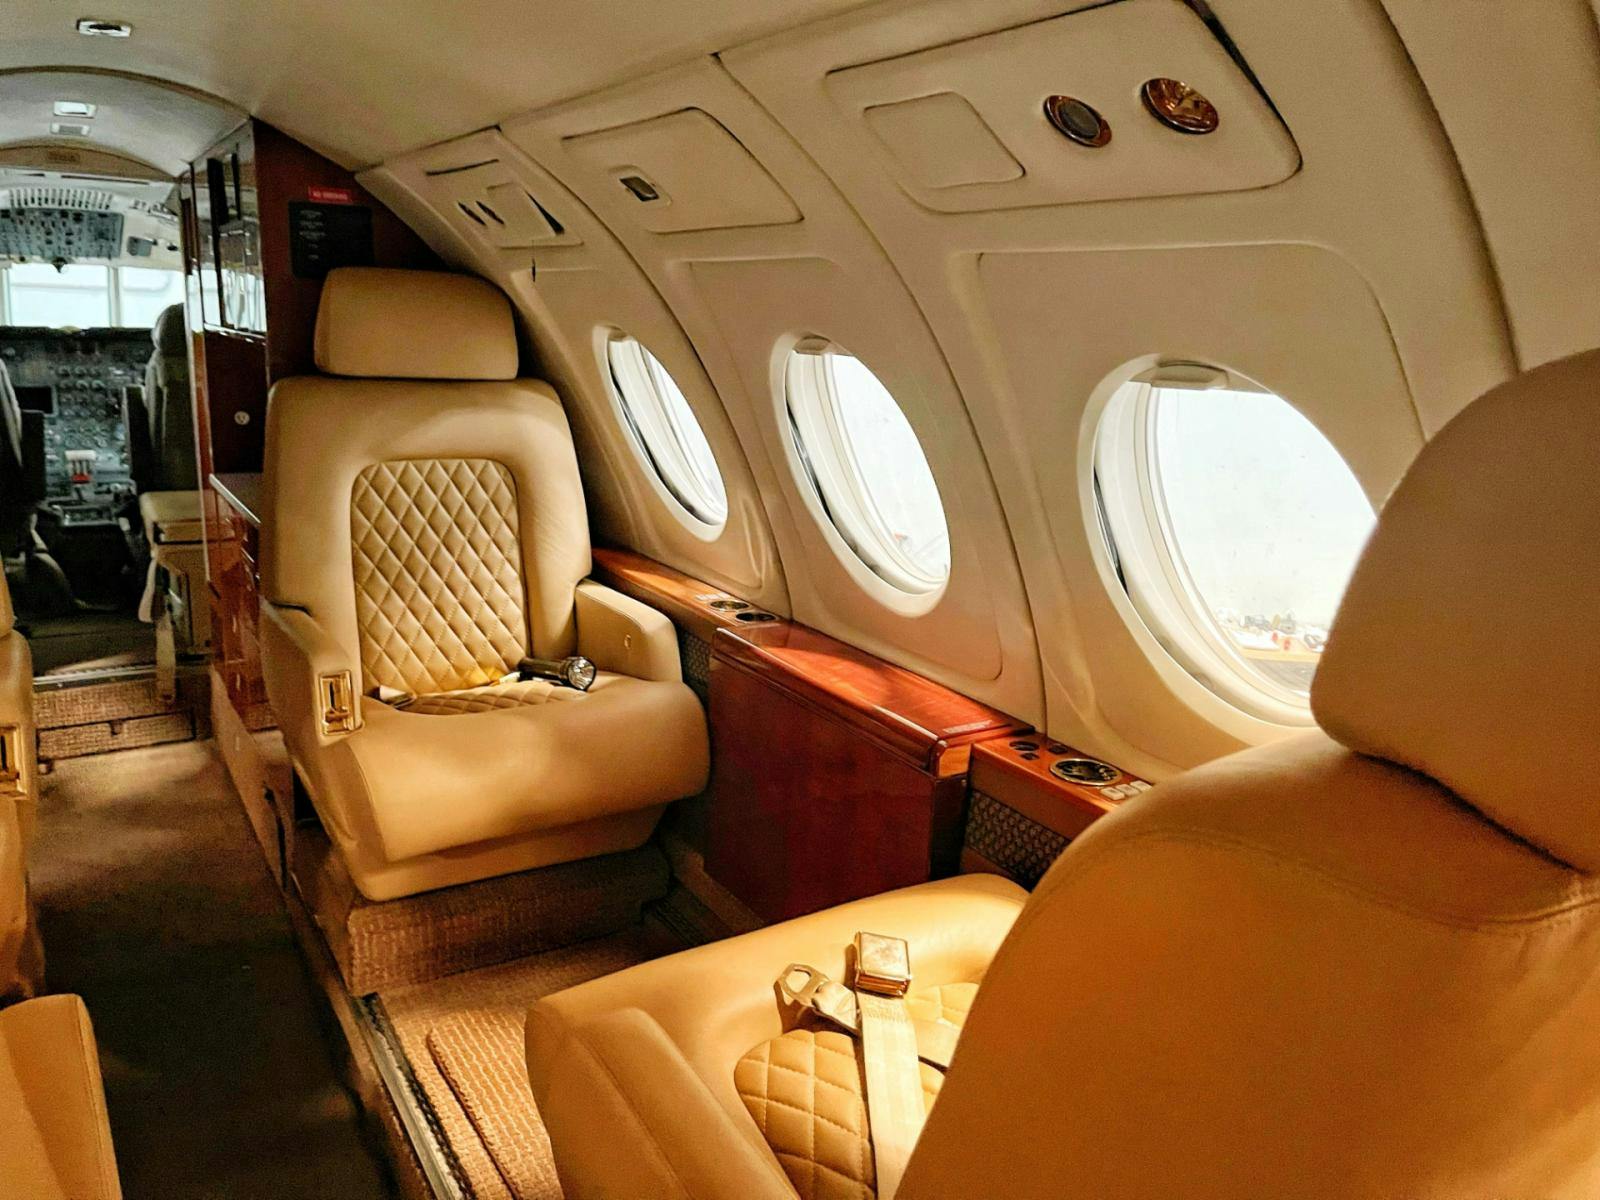 Inside of the cabin of a private jet.